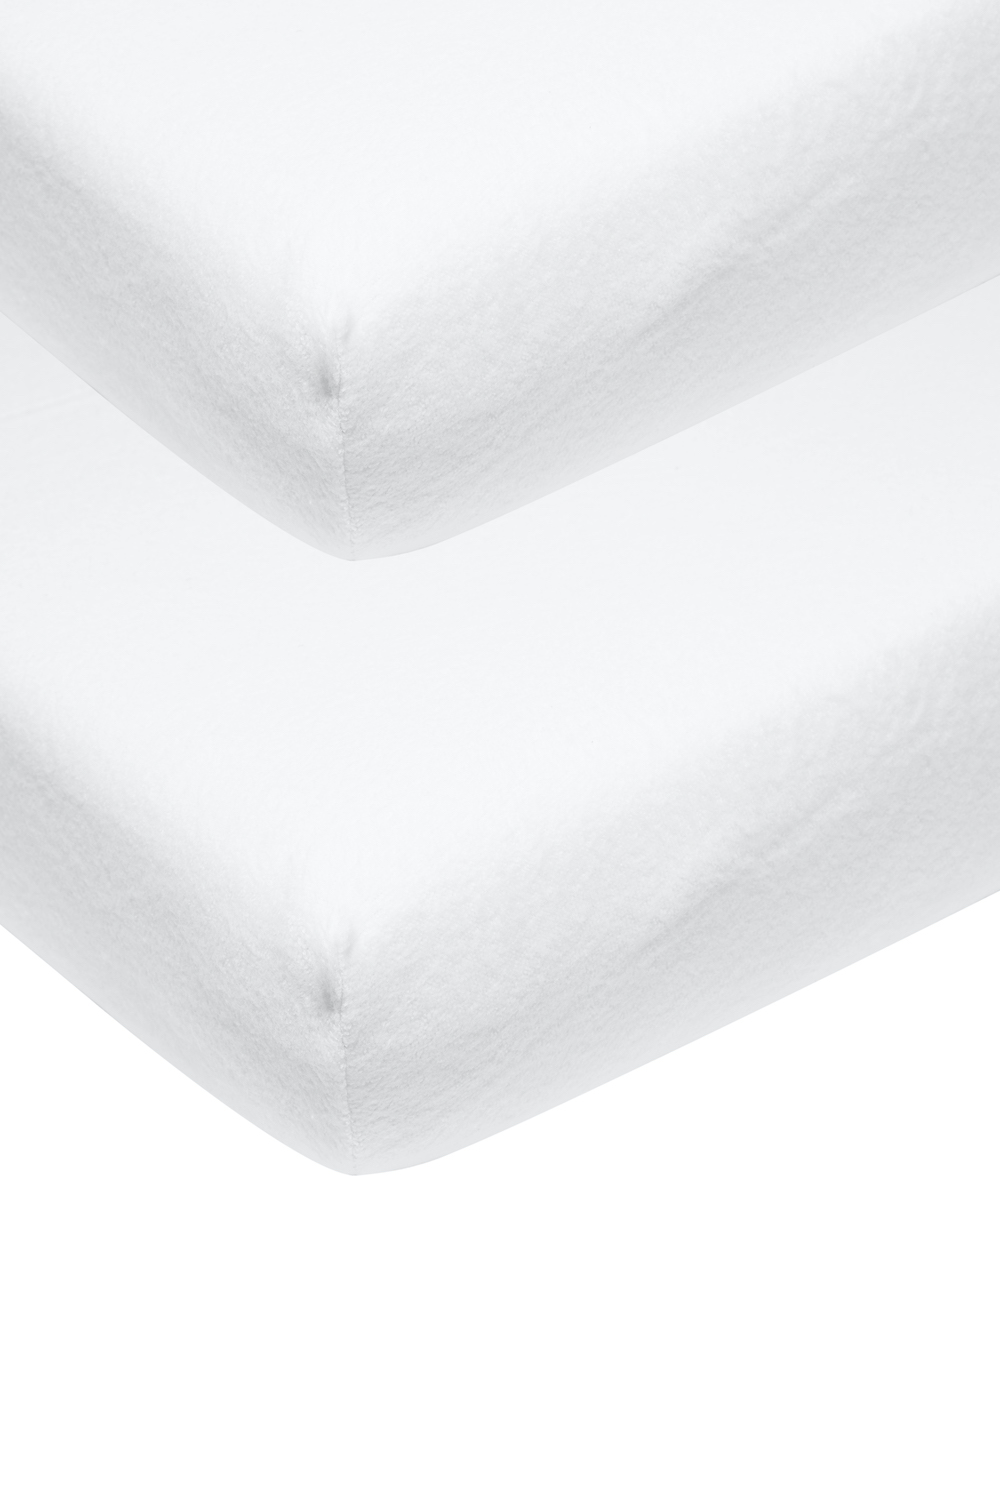 Molton stretch fitted sheet juniorbed 2-pack Uni - white - 70x140/150cm